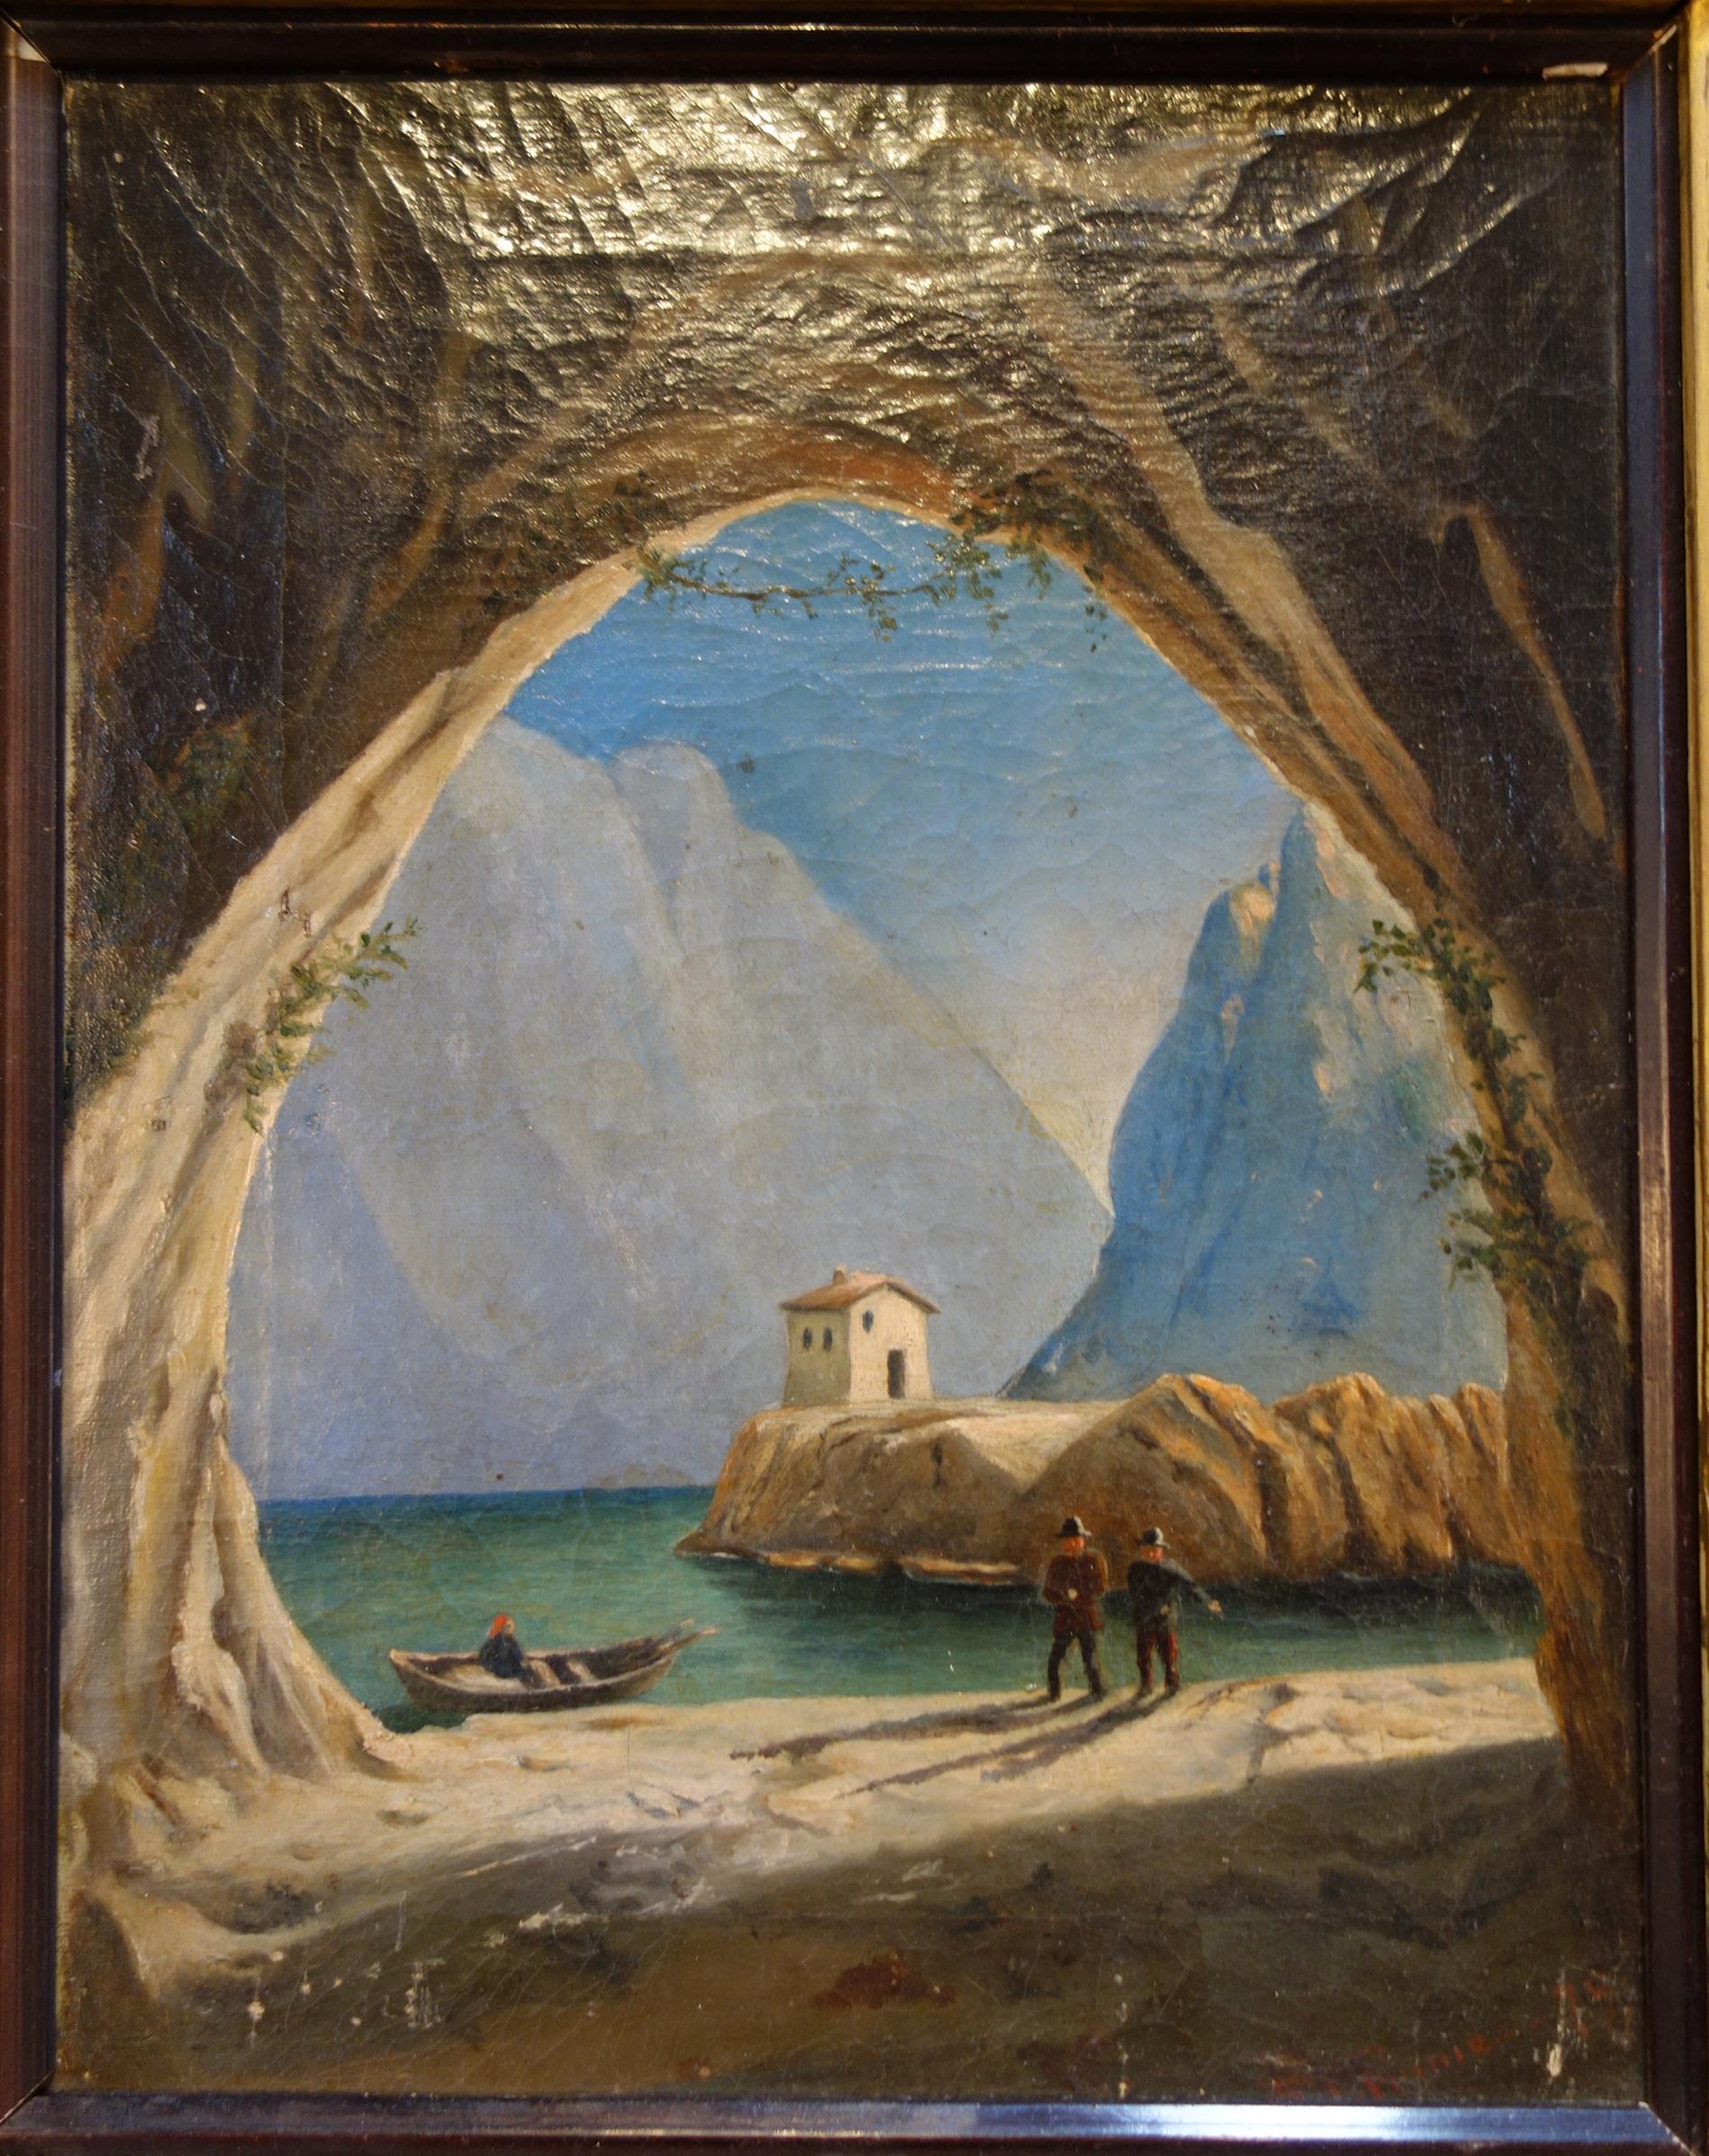 19th century Italian framed oil painting on canvas. Beautiful colors, intriguing perspective in this glimpse through a cave with figures on a mountain lake. Signed on the bottom right corner. Possibly the glacier Lake Garda (Benàco) with the